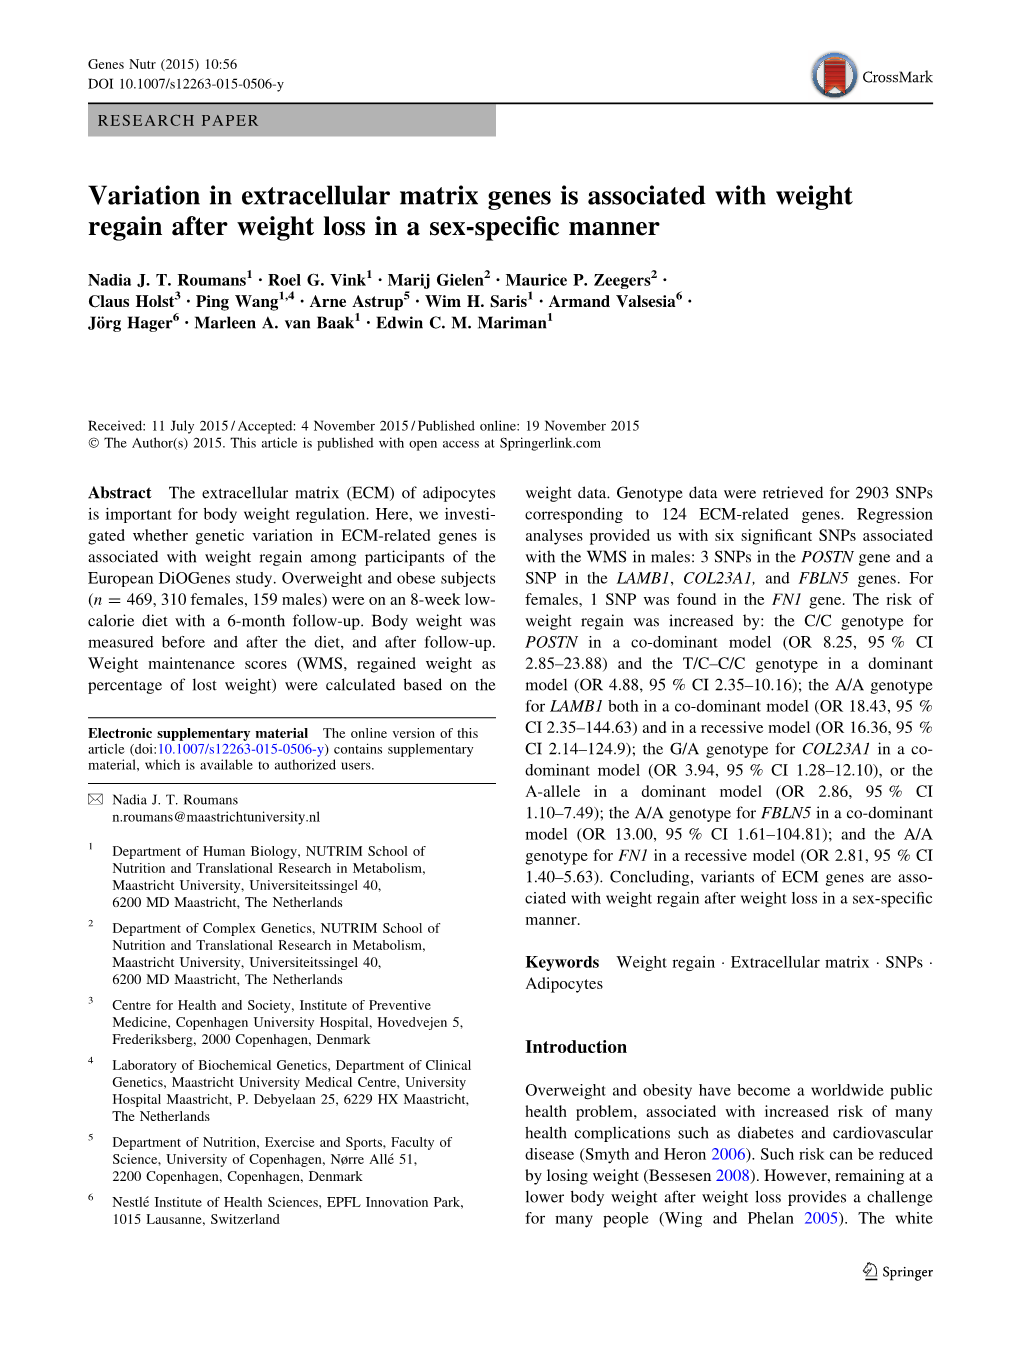 Variation in Extracellular Matrix Genes Is Associated with Weight Regain After Weight Loss in a Sex-Speciﬁc Manner